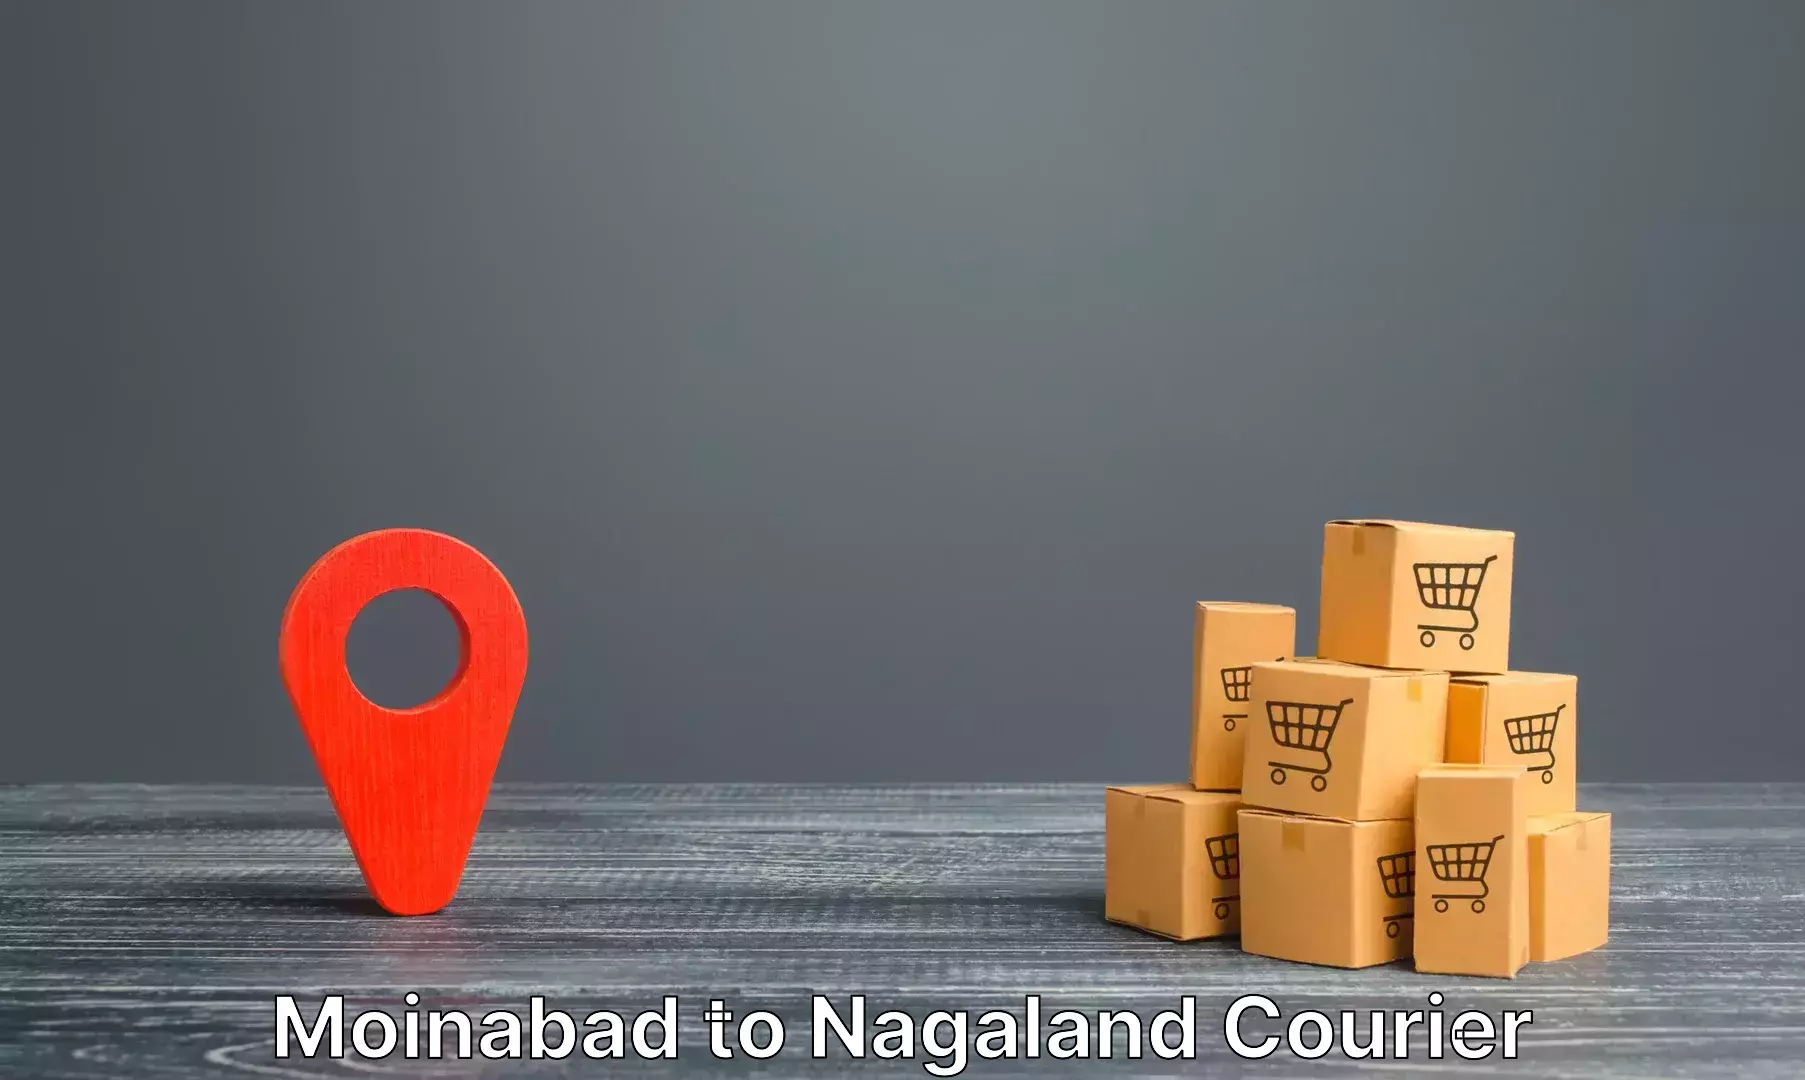 Baggage transport network Moinabad to Dimapur